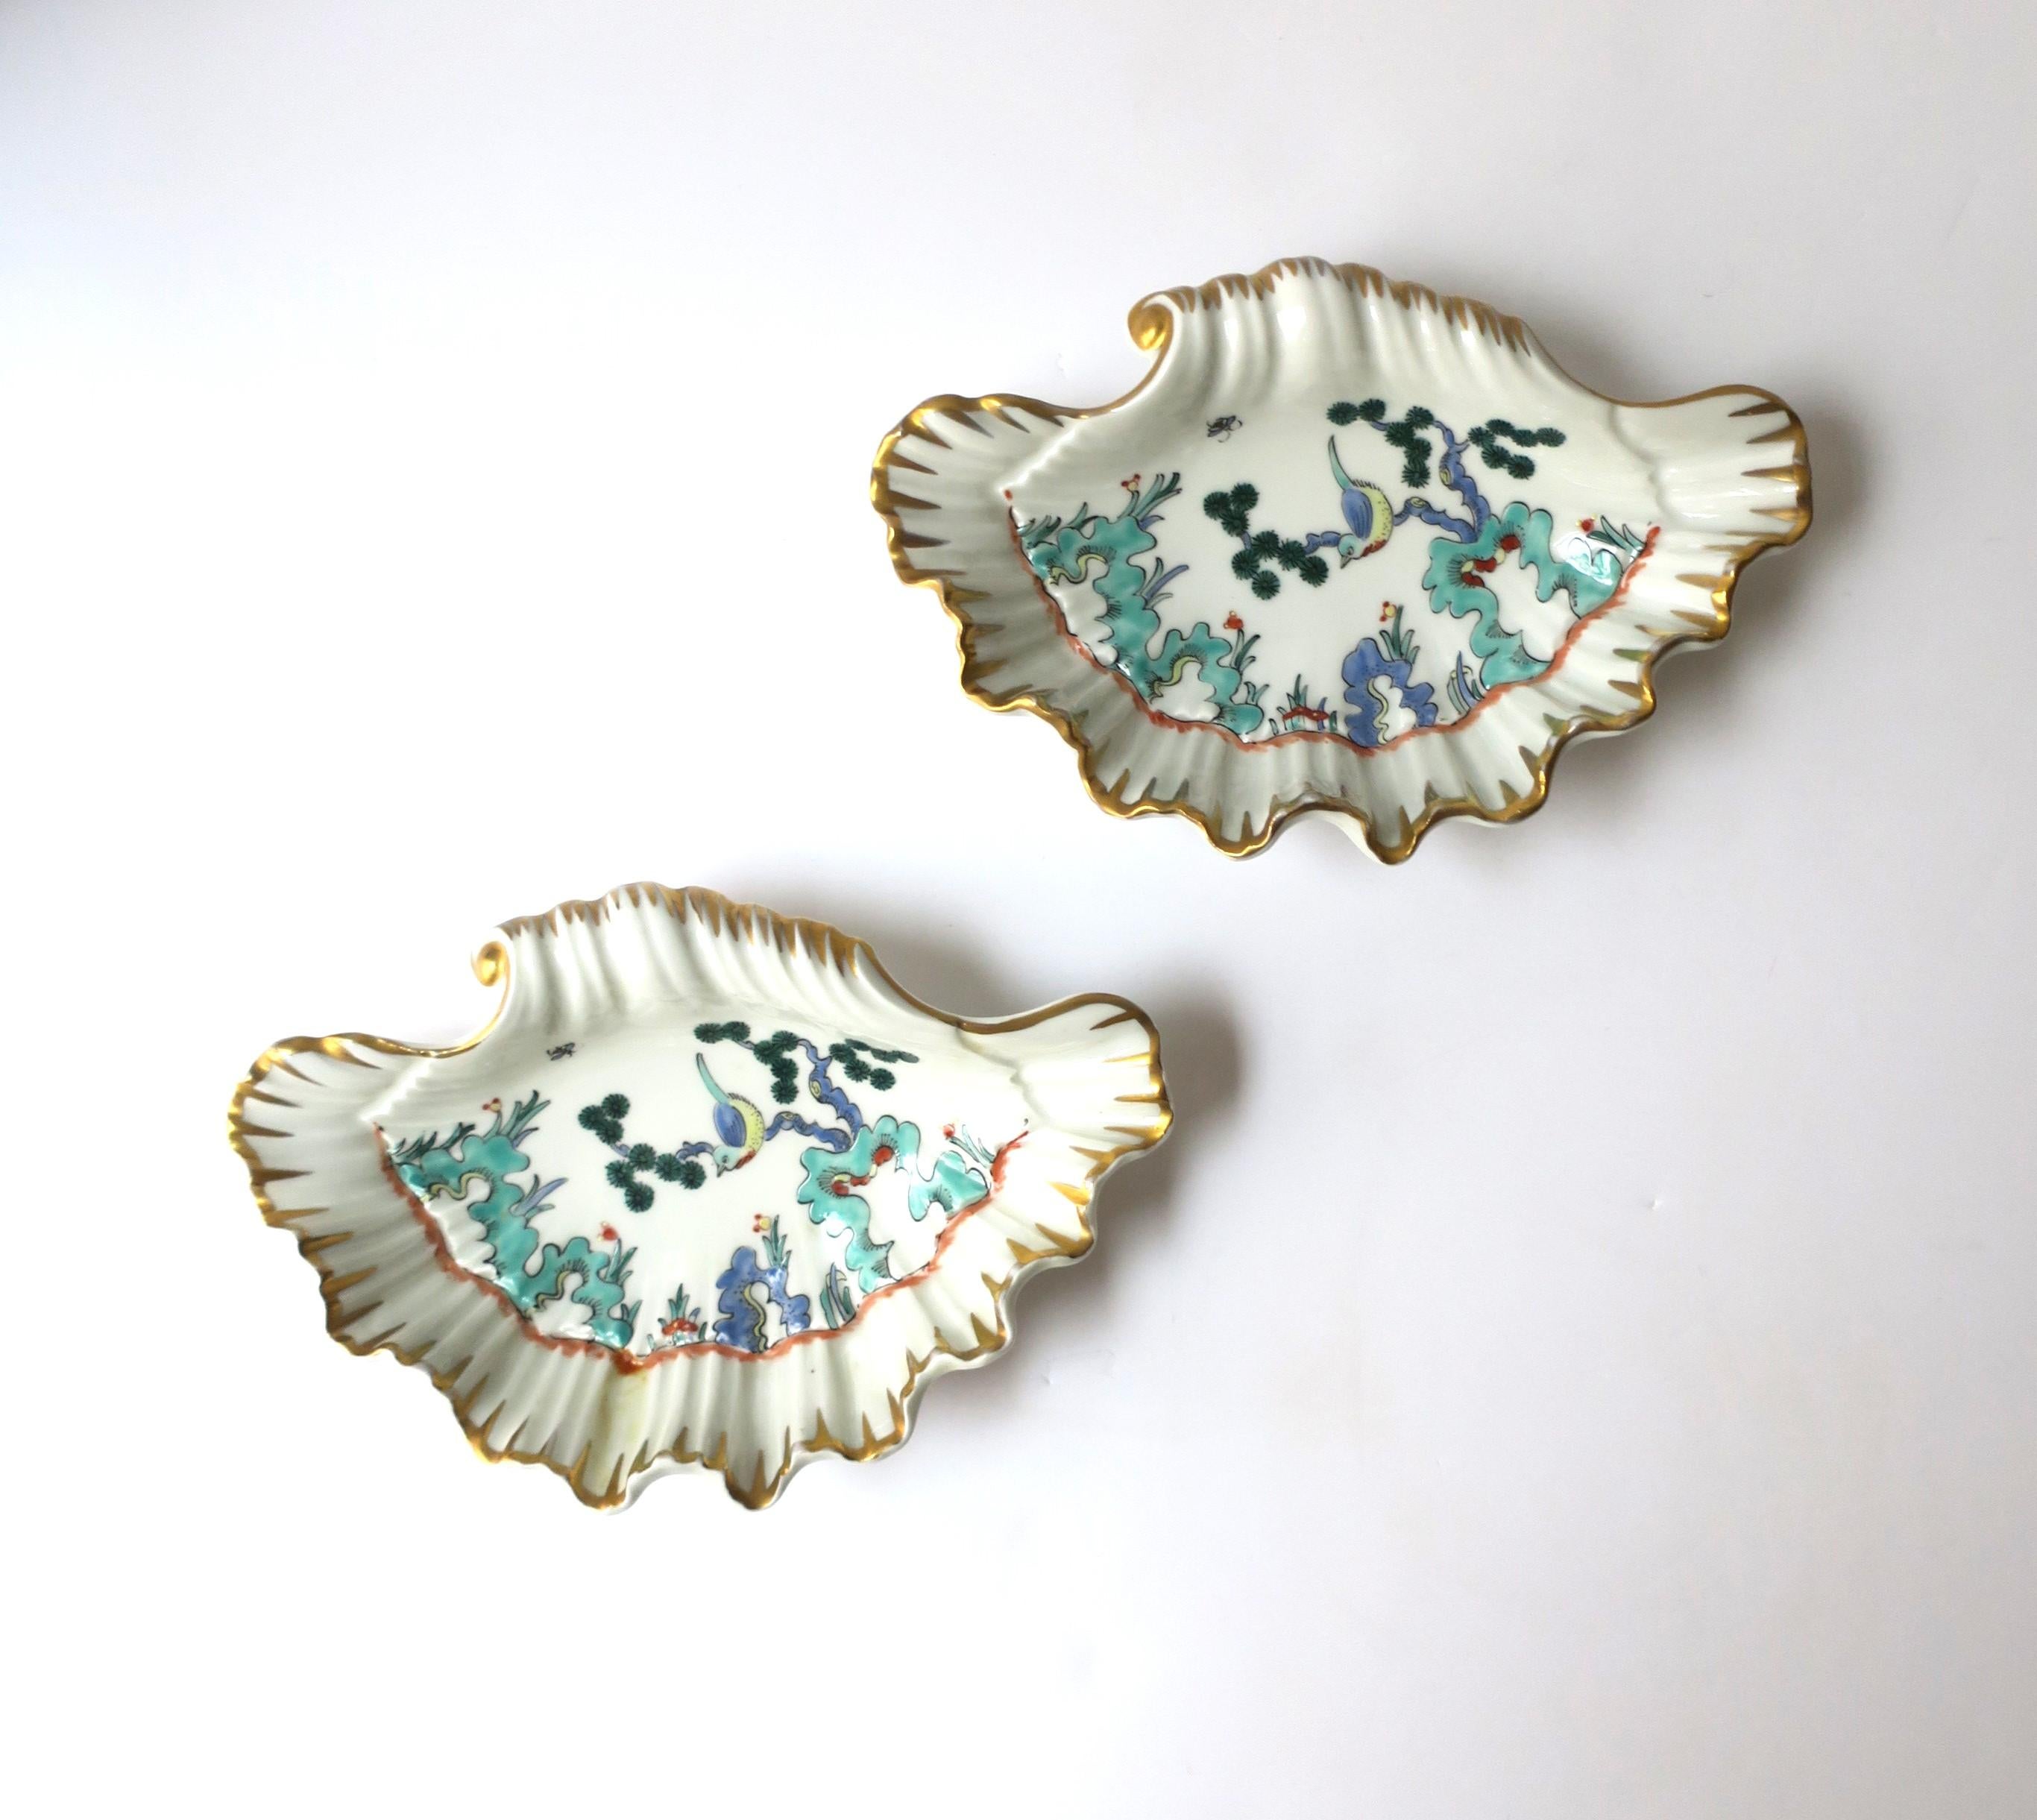 A beautiful pair of French porcelain seashell bowls with bird design, circa early-20th century, Paris, France. These porcelain seashell bowls have a colorful raised relief of a bird and tree design with surrounded by gold detail. These seashell